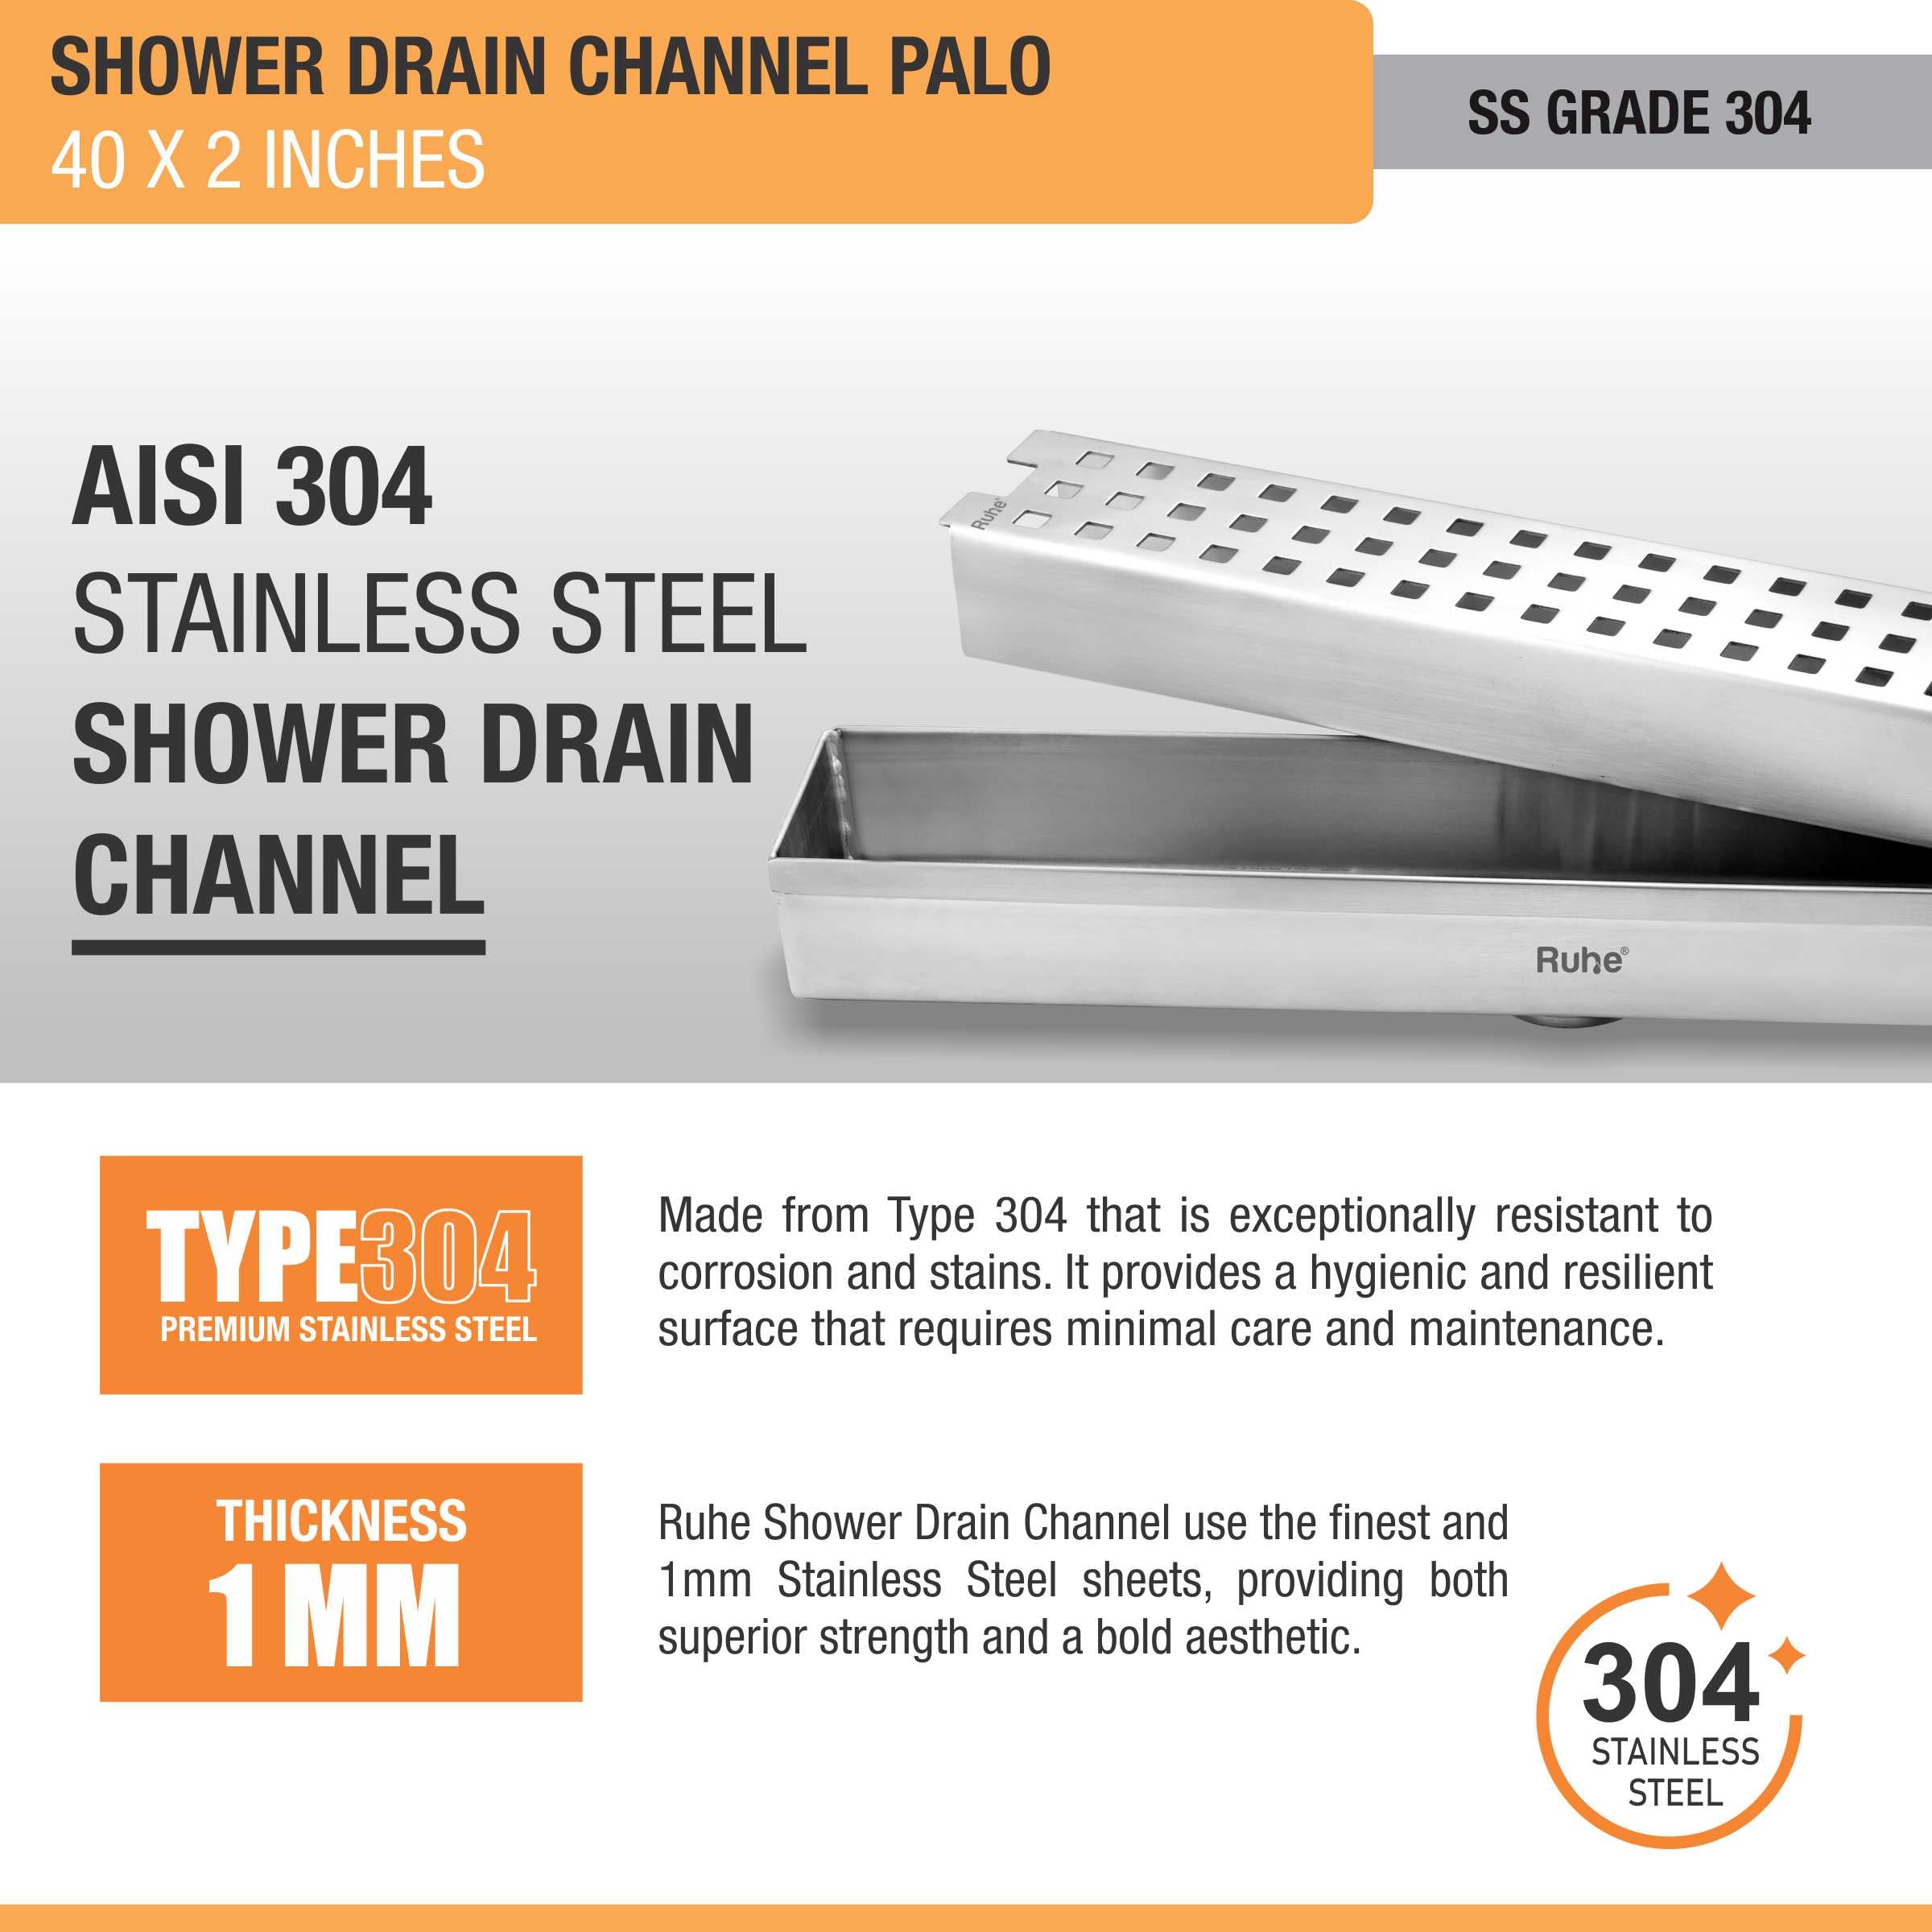 Palo Shower Drain Channel (40 X 2 Inches) (304 Grade) stainless steel